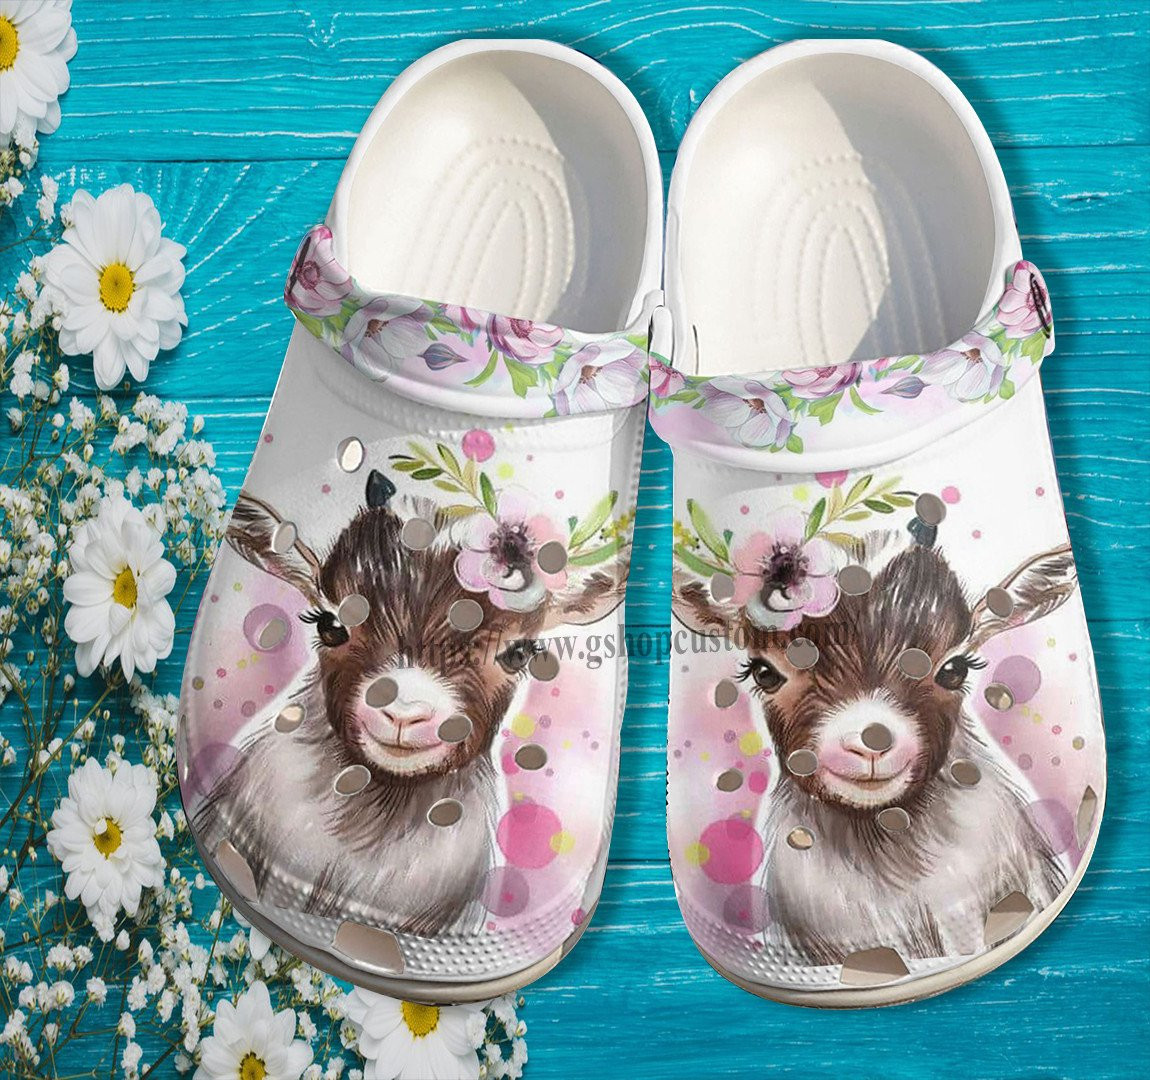 Goats Girl Twinkle Pink Croc Shoes Daughter- Just A Girl Love Goats Shoes Croc Clogs Birthday Gift